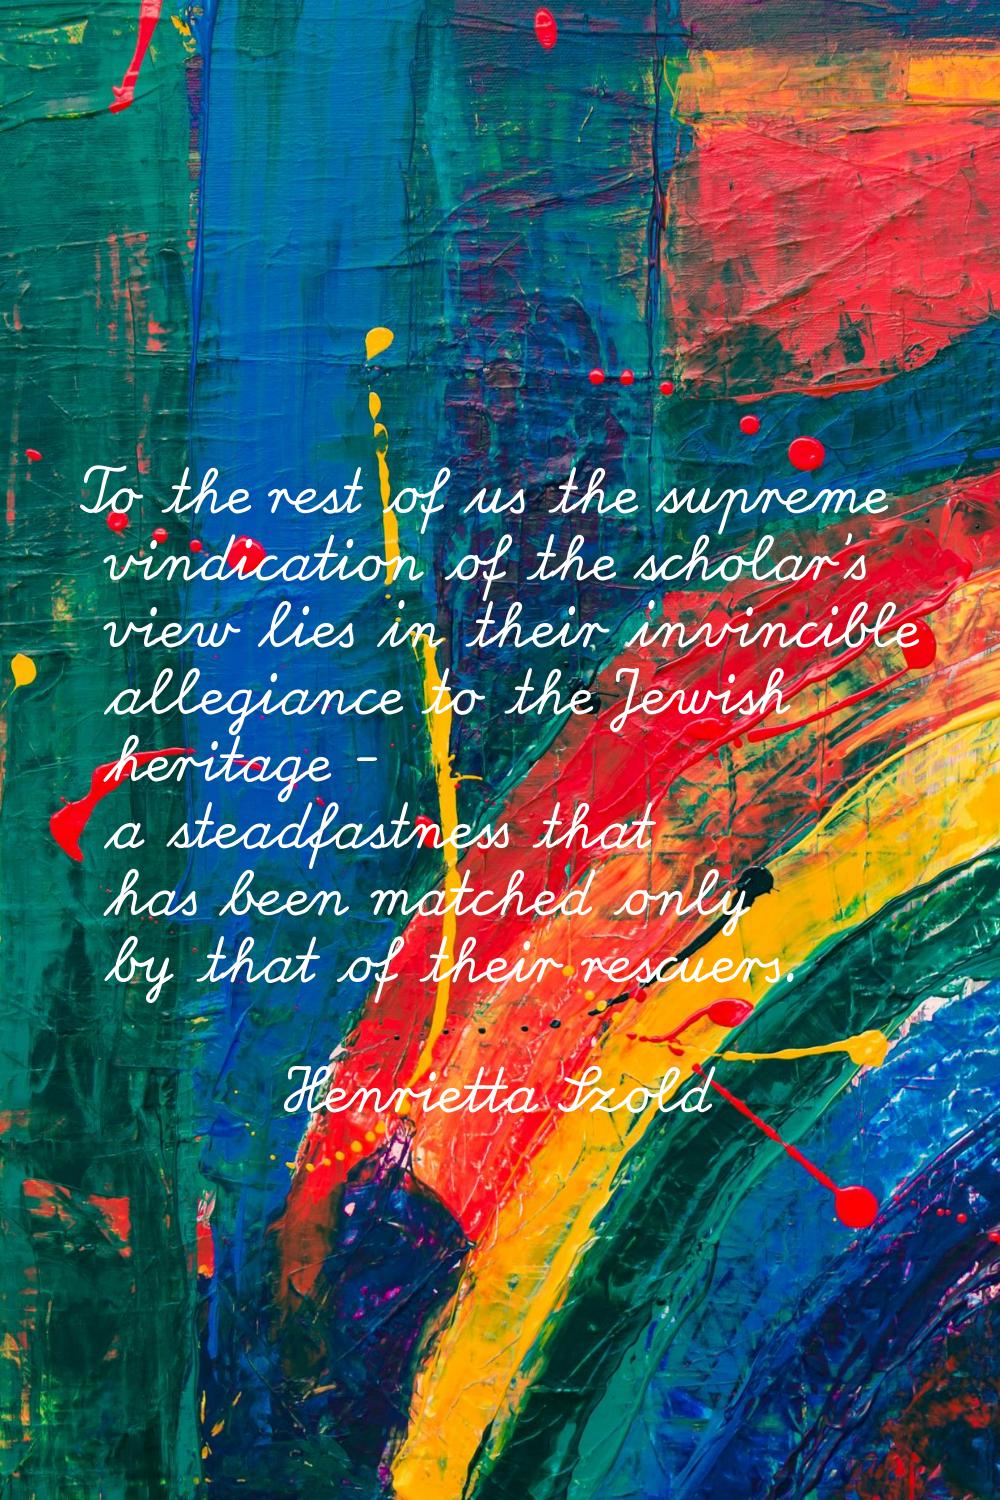 To the rest of us the supreme vindication of the scholar's view lies in their invincible allegiance